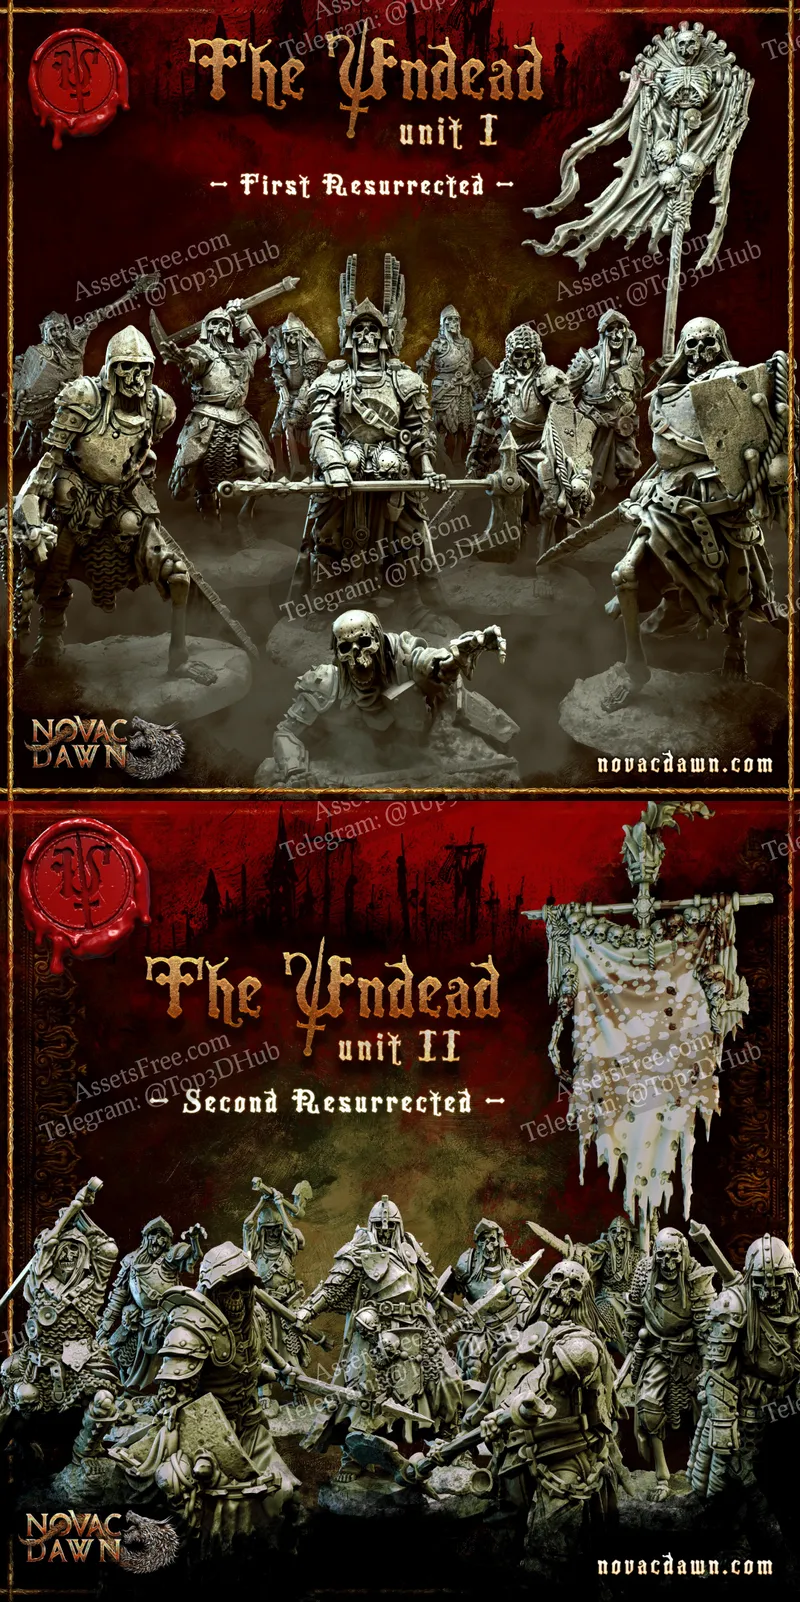 The Undead - Unit I - First Resurrected and Unit II - Second Resurrected